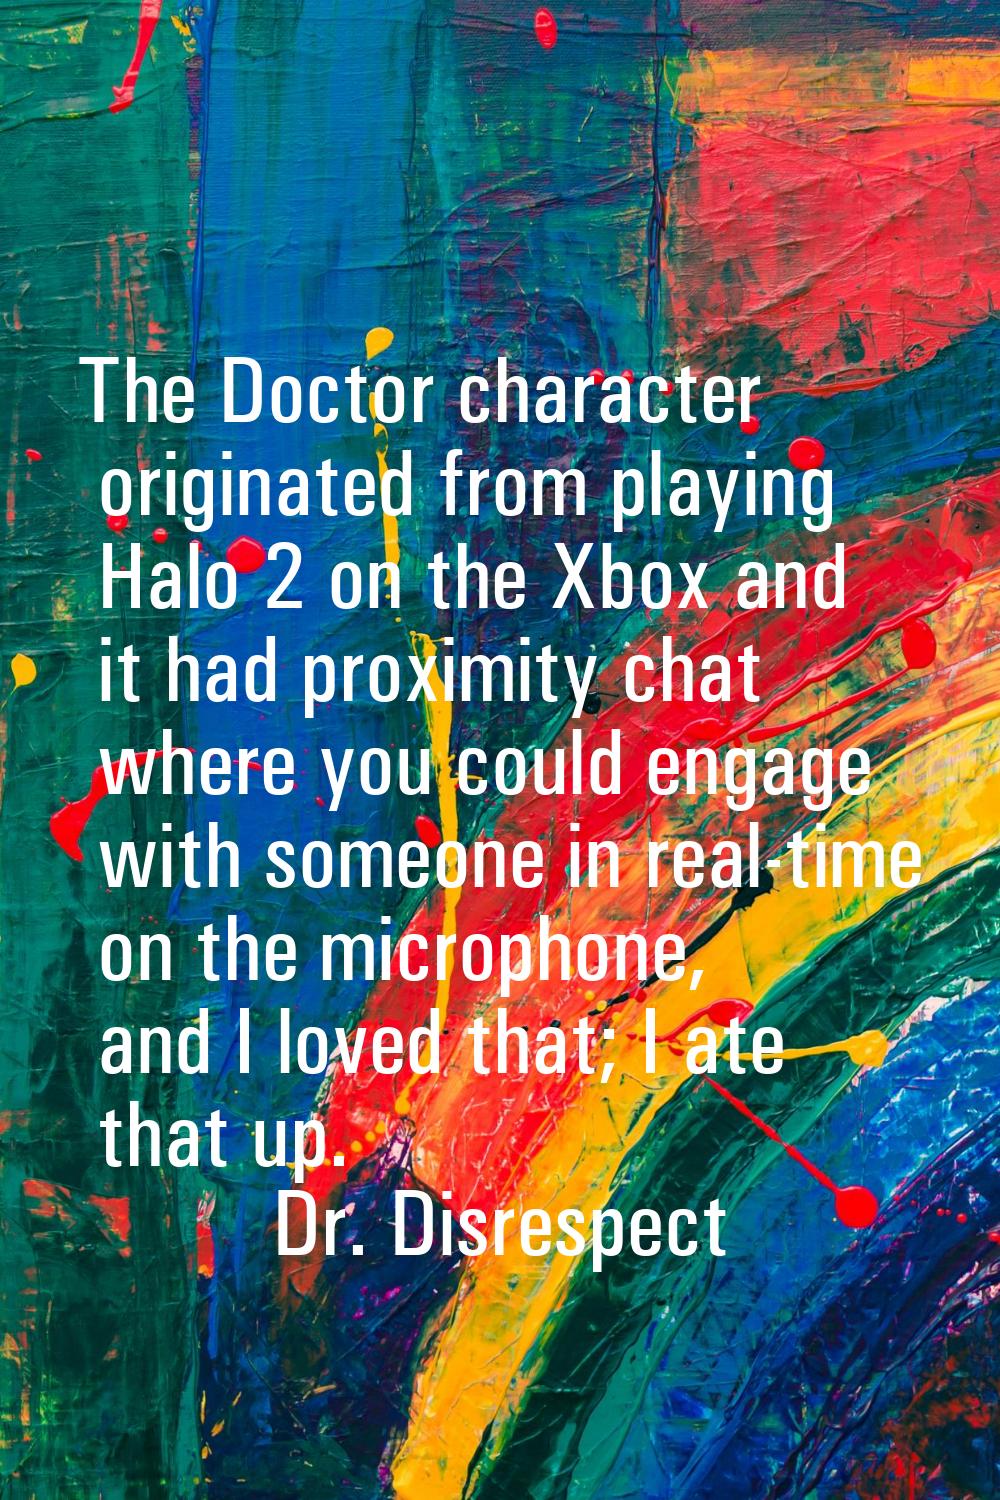 The Doctor character originated from playing Halo 2 on the Xbox and it had proximity chat where you